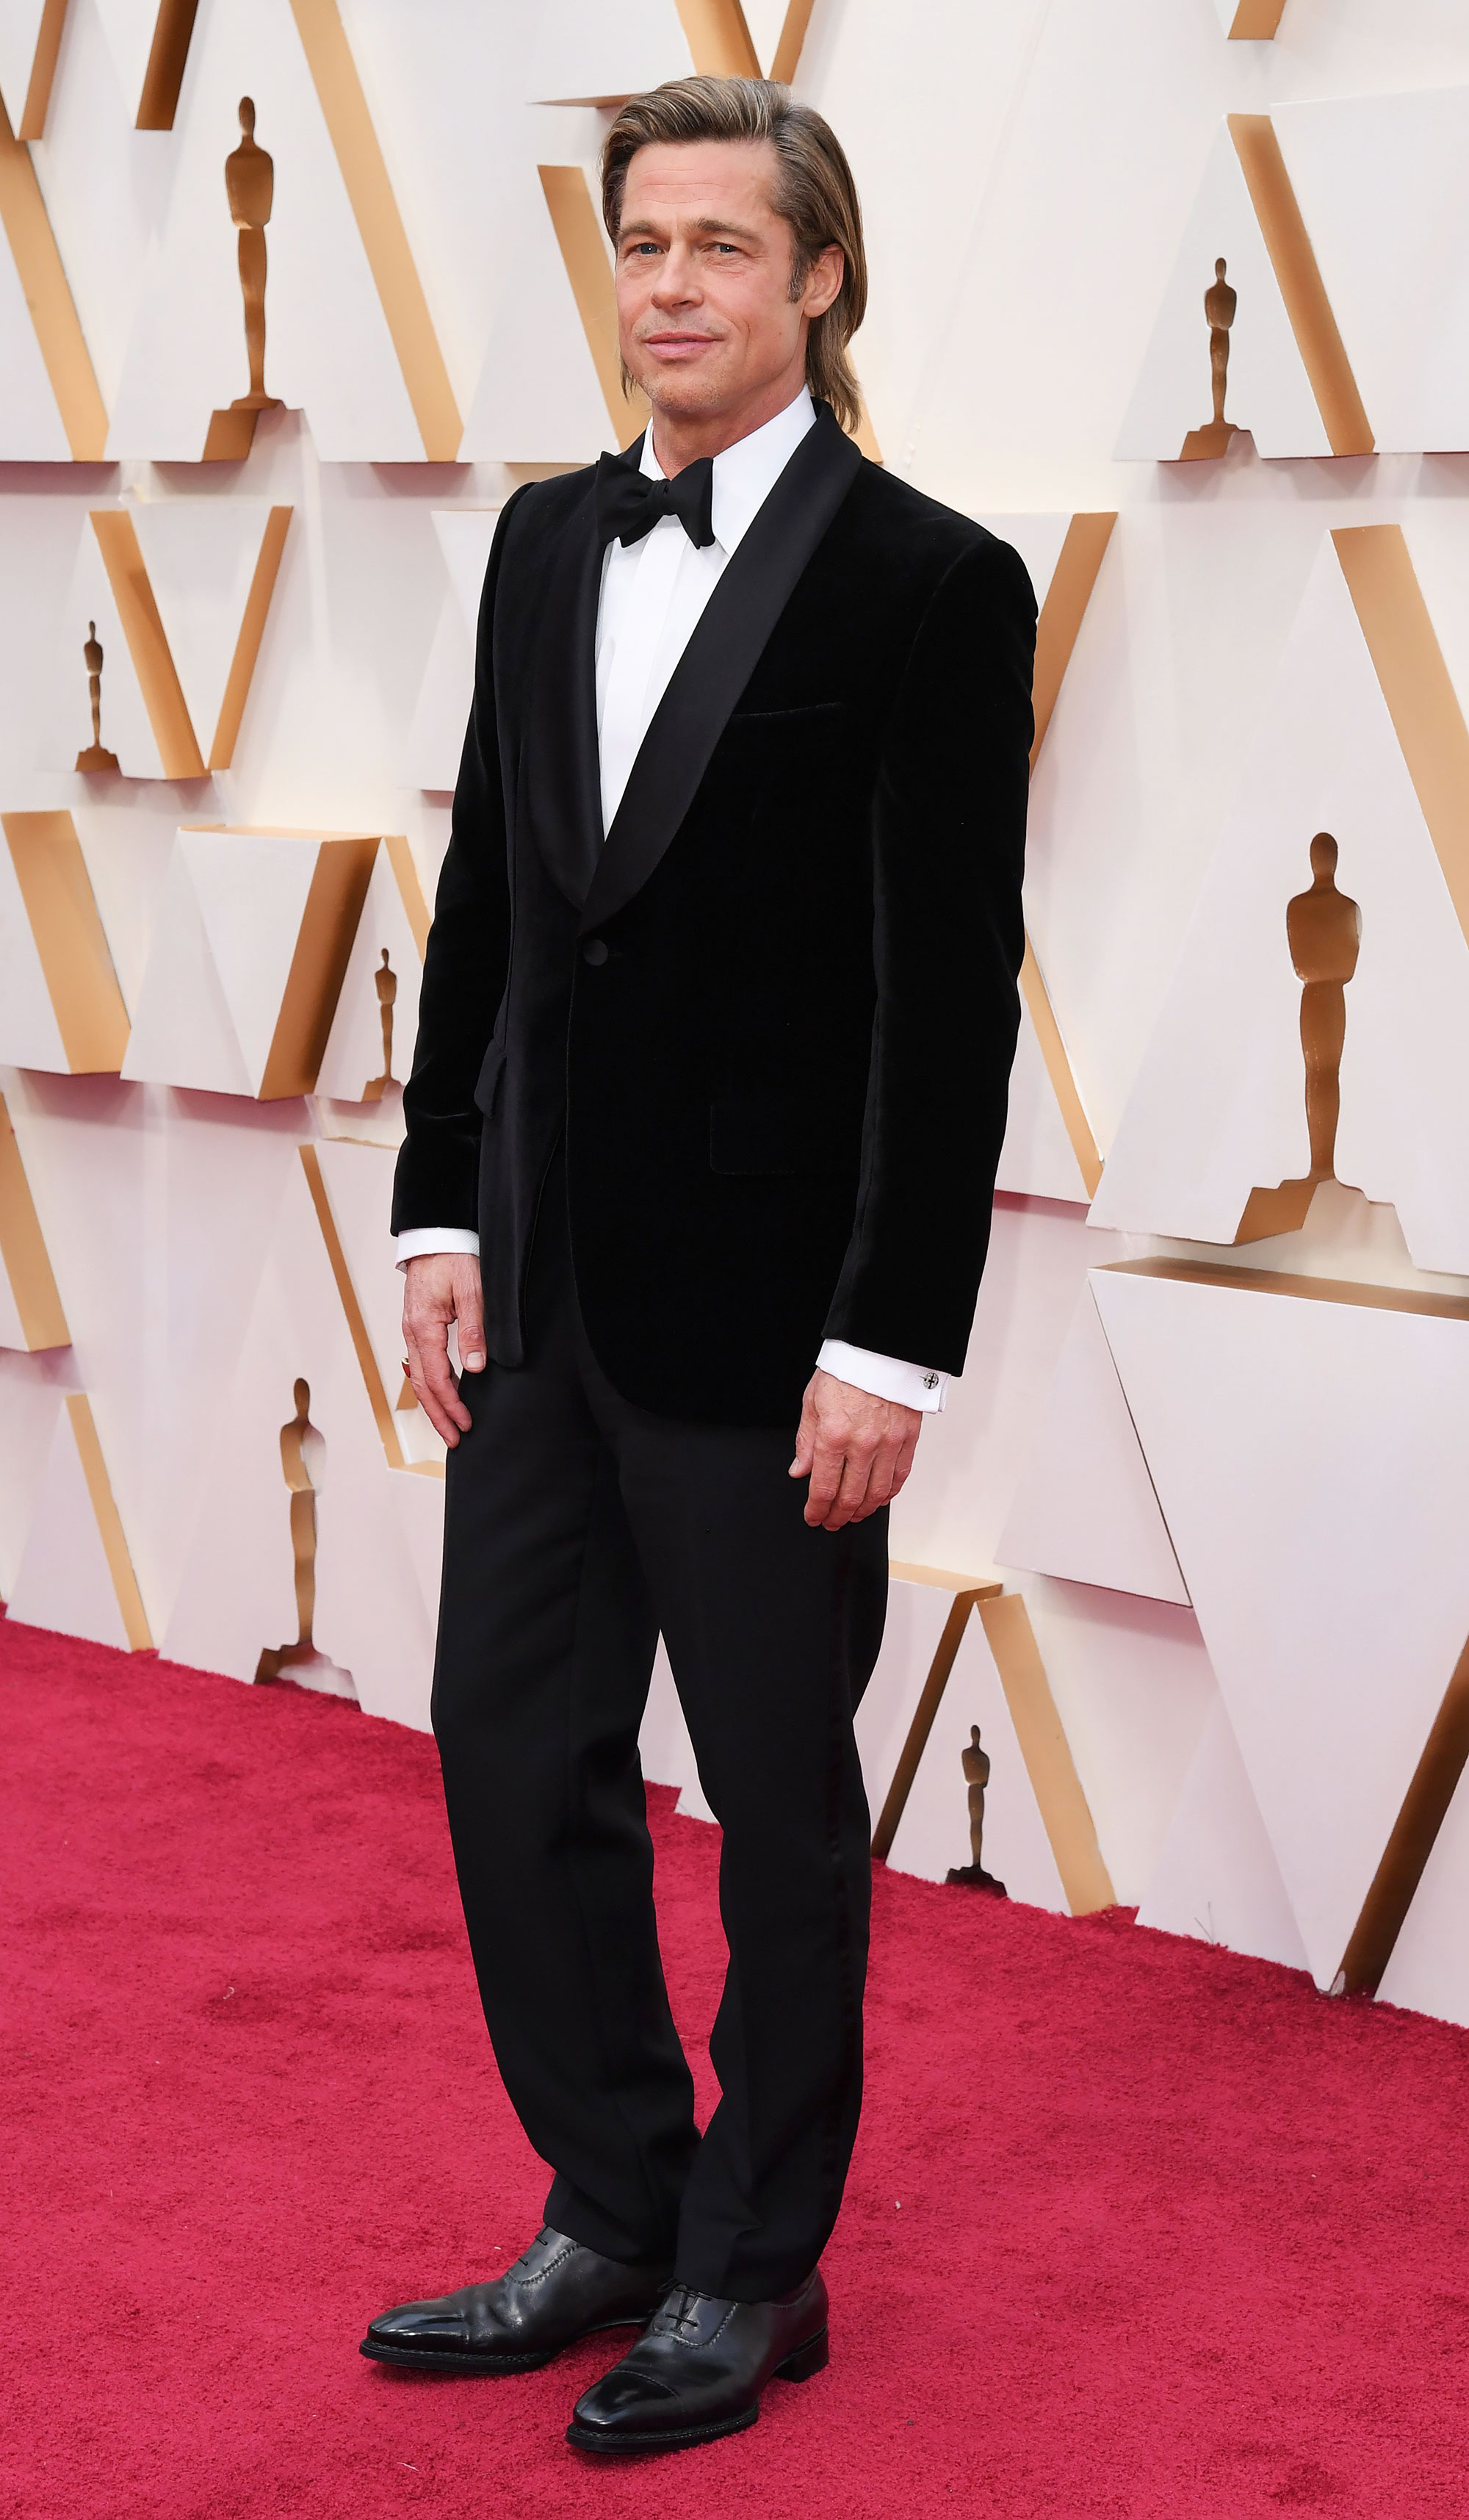 Oscars 2020 Red Carpet Fashion Hot Men in Suits, Tuxes